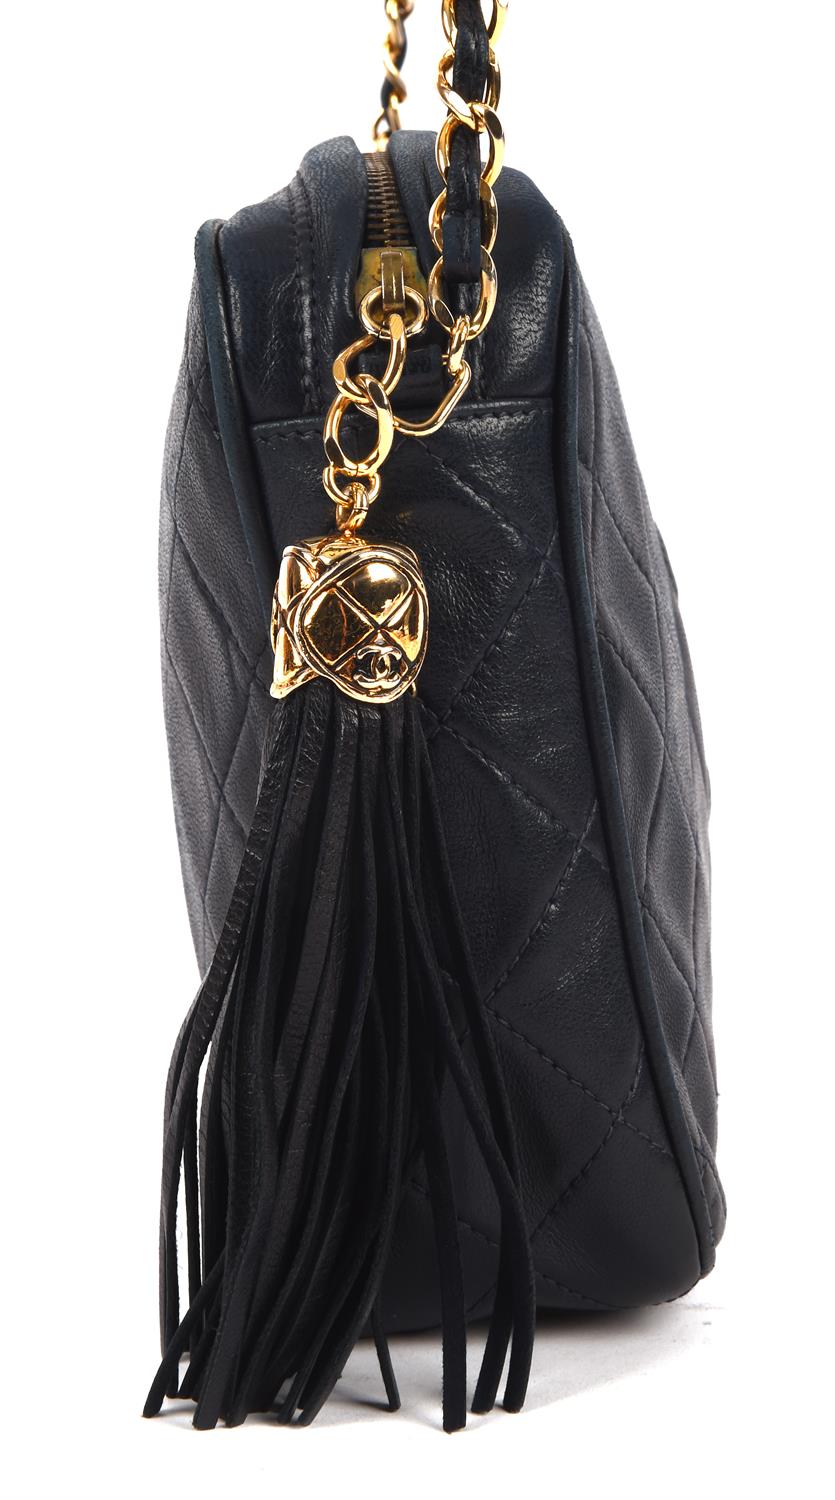 CHANEL navy blue lambskin leather matelasse chain shoulder bag with gold hardware with copy of - Image 3 of 8